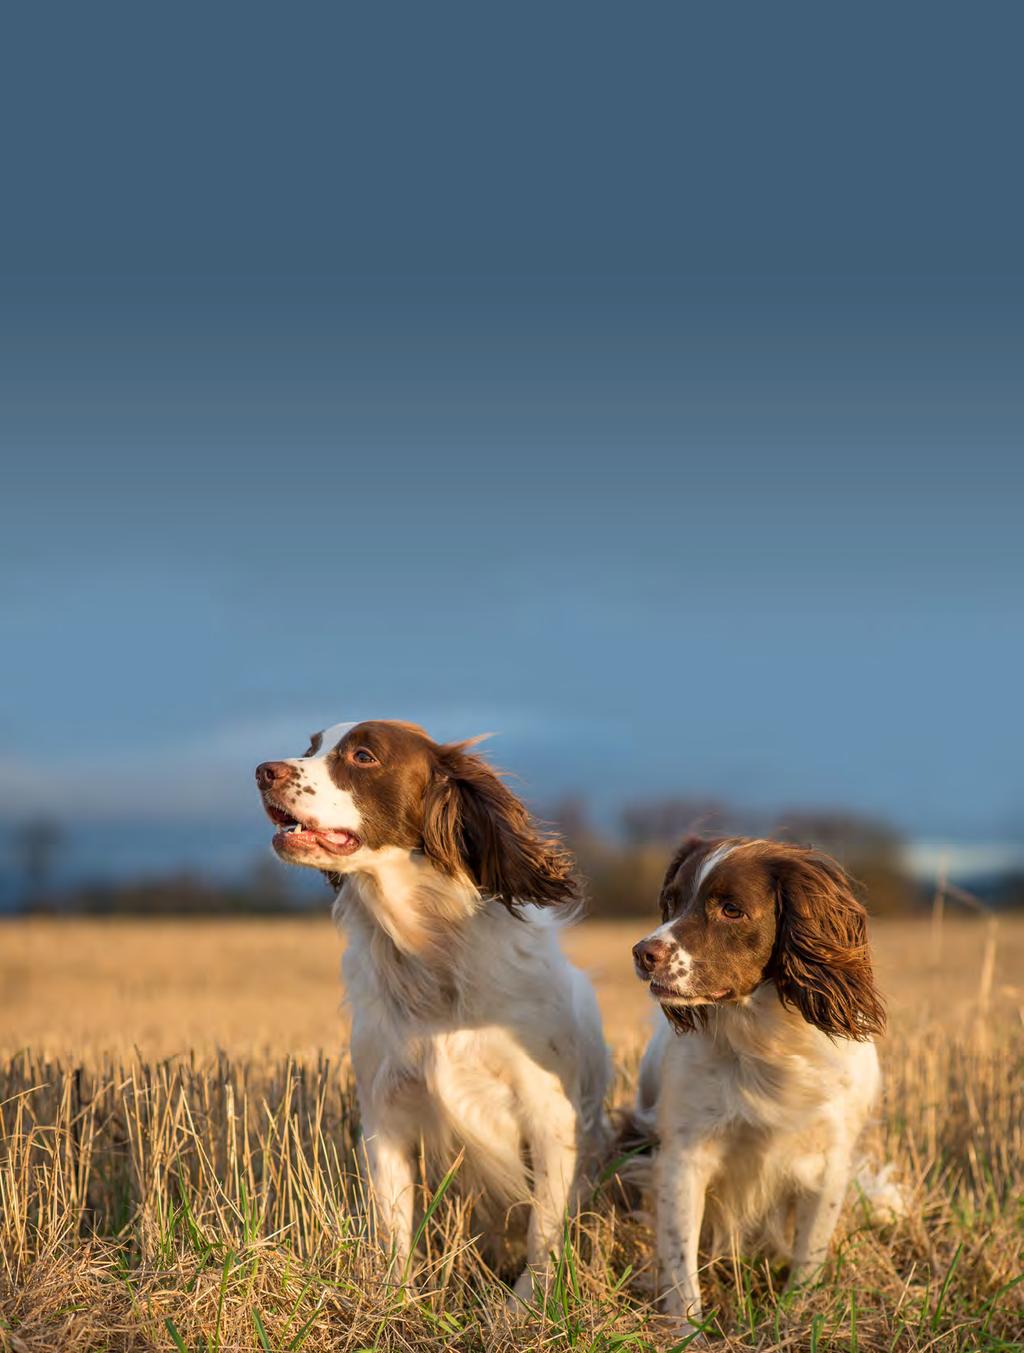 Health Resources The Kennel Club, in conjunction with the British Veterinary Association (BVA), runs screening schemes for a range of inherited diseases, including hip and elbow dysplasia, eye